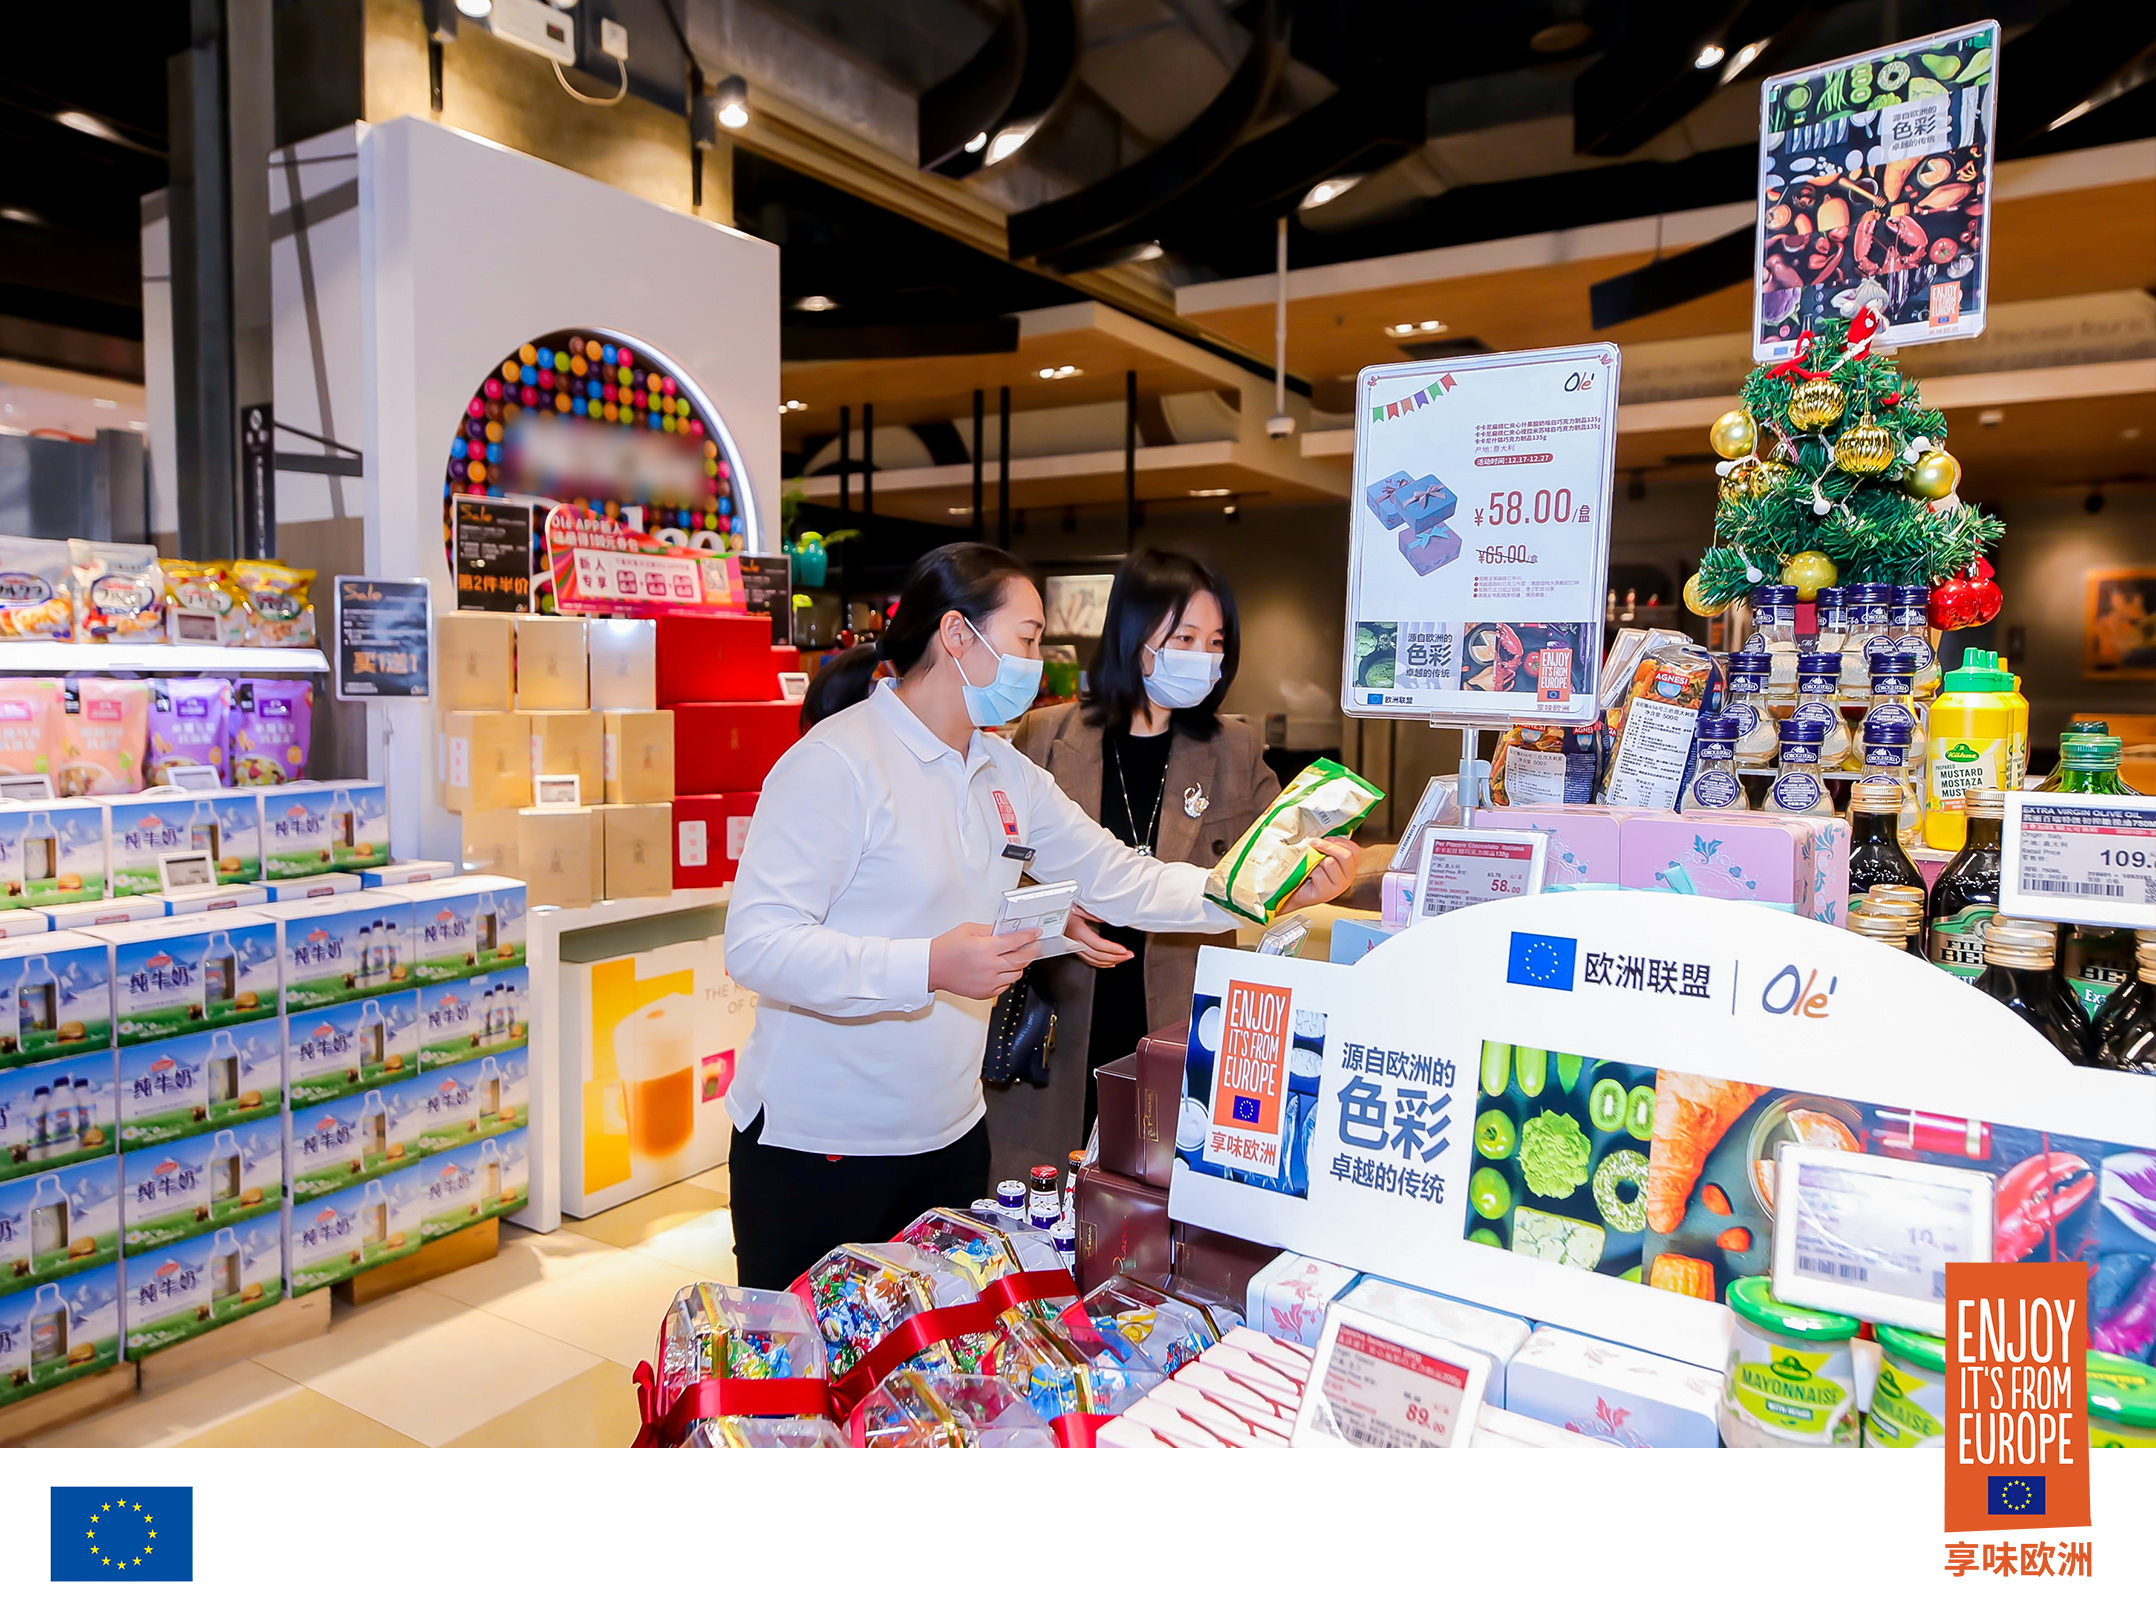 Customers selecting EU products.